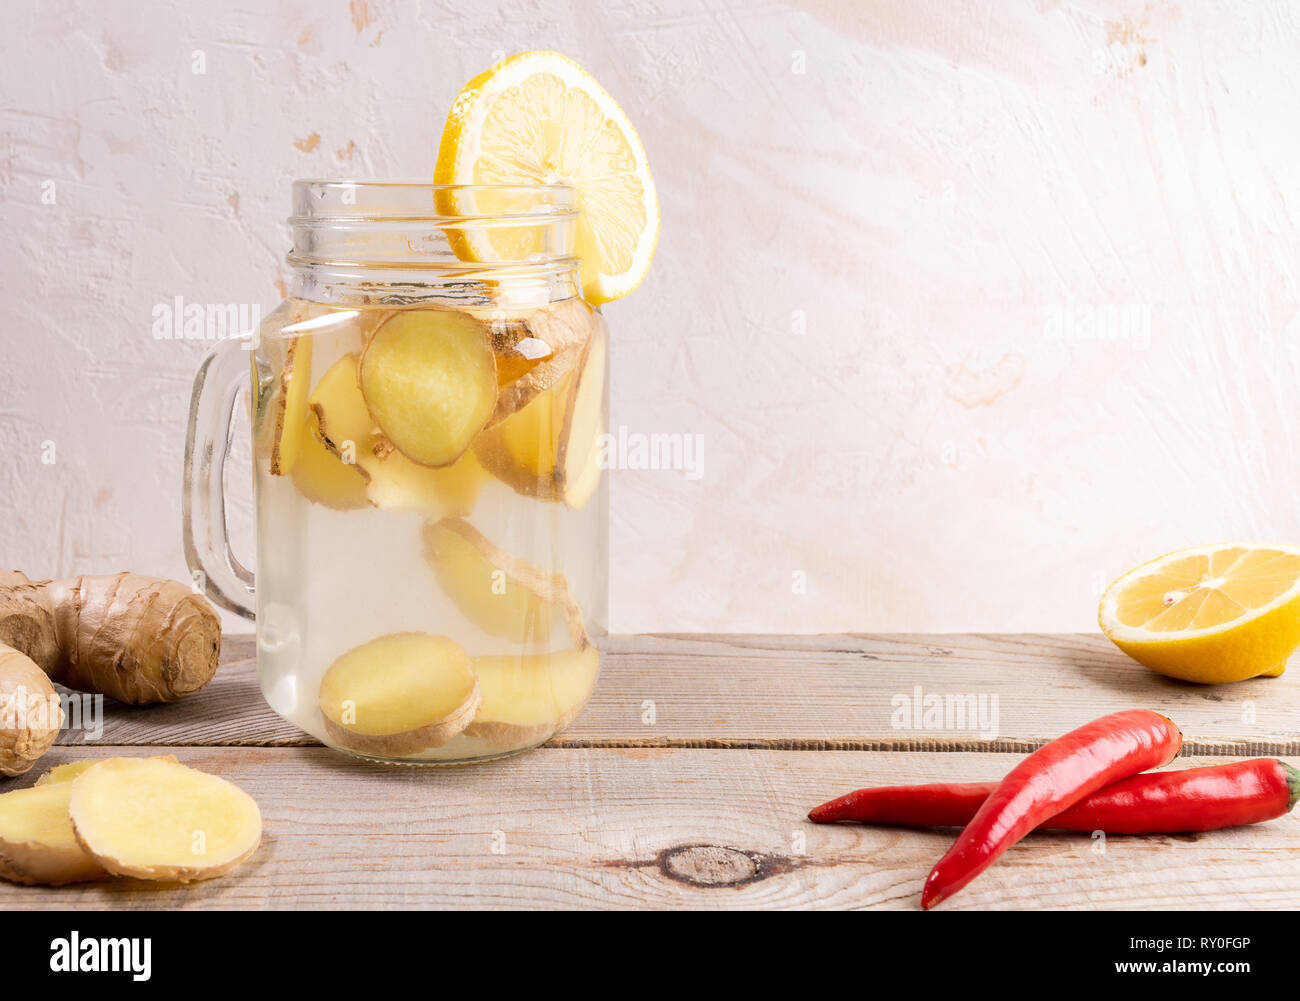 Glass jar full with ginger water and spises on wooden table on light background.  Stock Photo